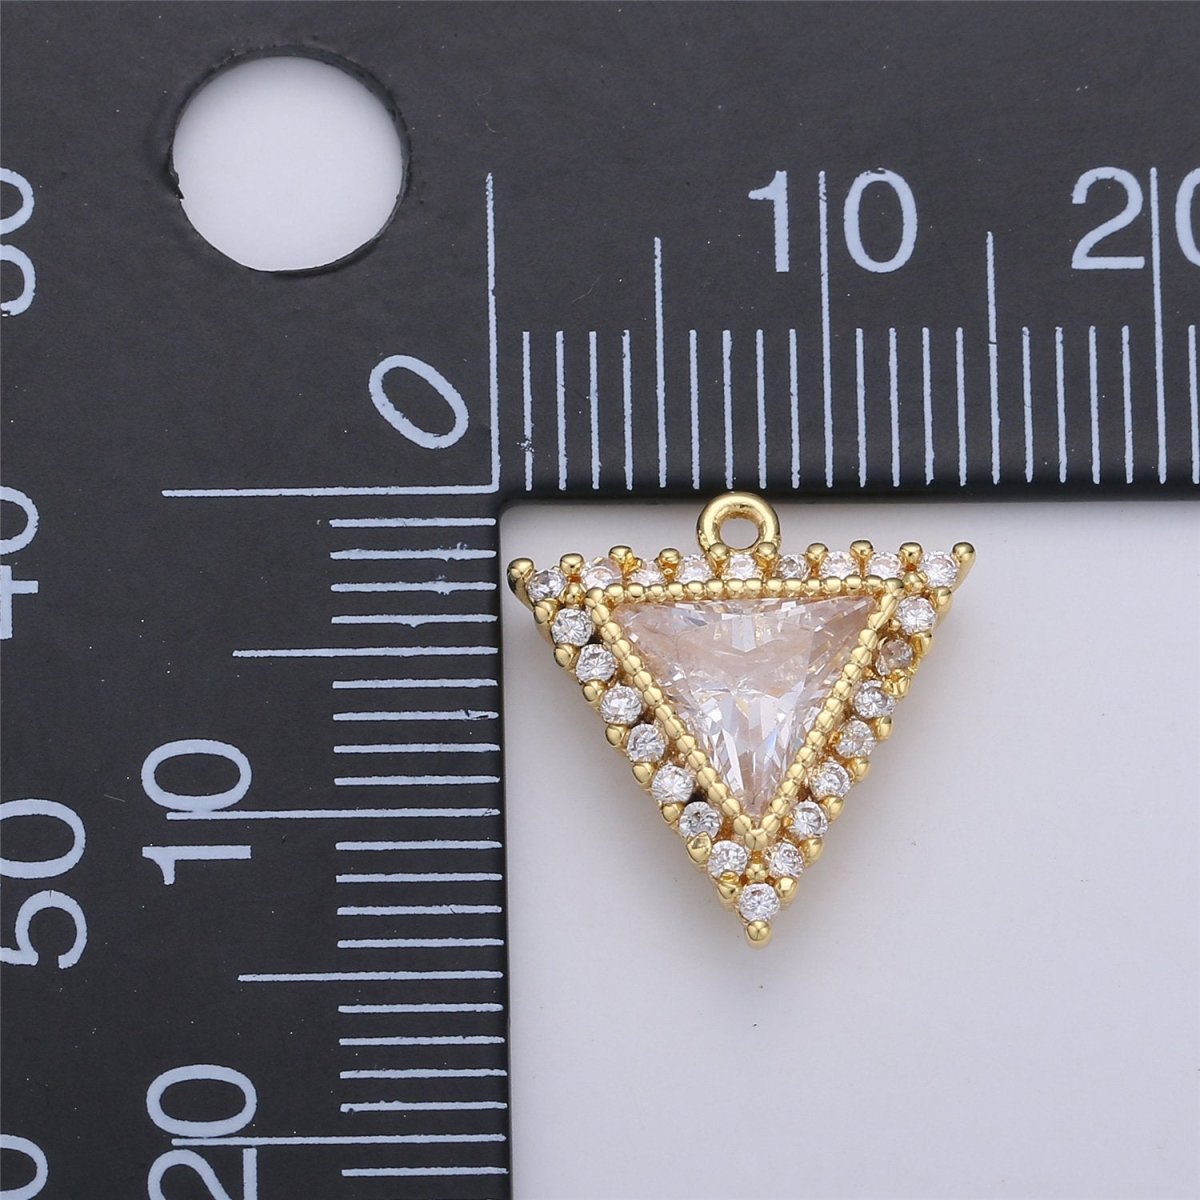 Dainty 18K Gold Filled Triangle Charm Micro Pave Pyramid Cubic Charm Bracelet Necklace Earring Charm Component Jewelry Making Supply C-650 - DLUXCA